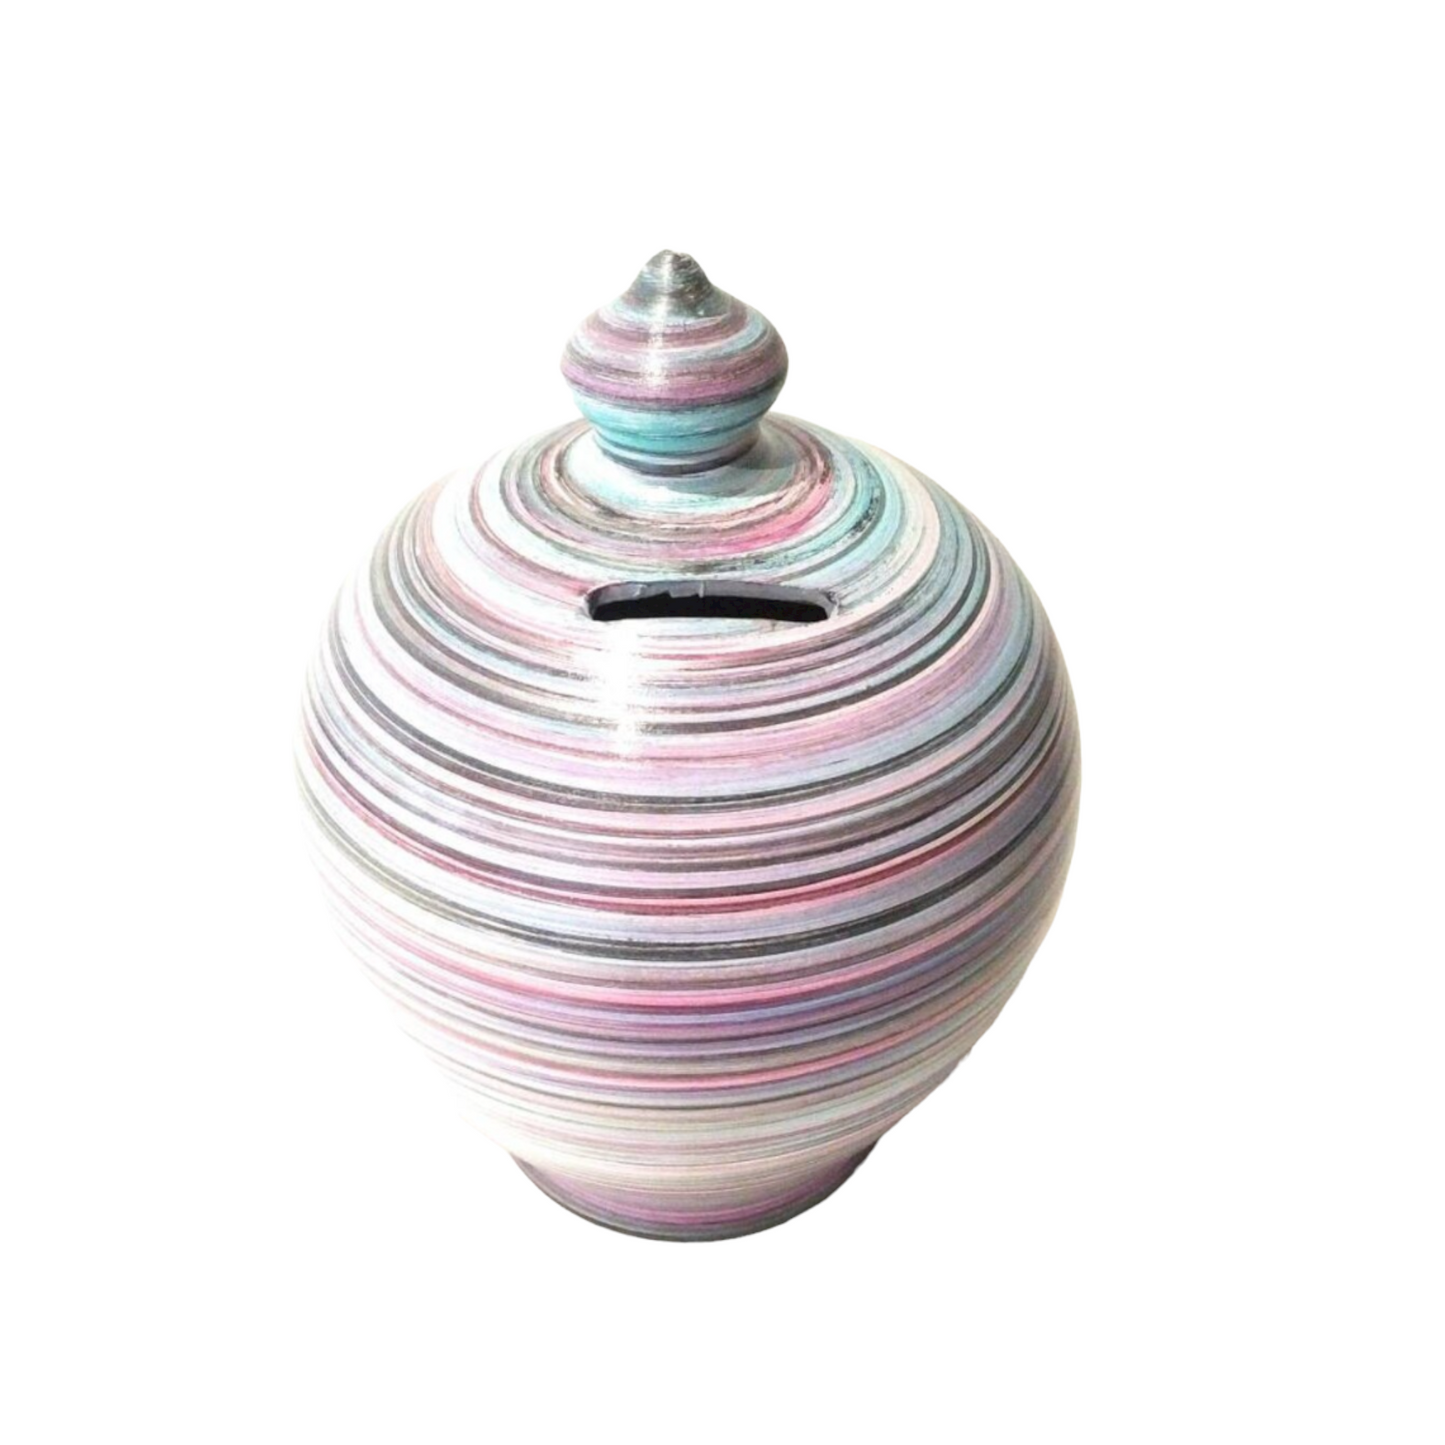 Handmade Italian pottery at its finest. Add character to your home and save money in style!  Colors: Pink, Turquoise, Black, White and a little silver, as in picture.  Size: 17 cm = 6.70 inches in height. Circumference: 44 cm = 17.32 inches.  With hole and stopper plug, or without hole.